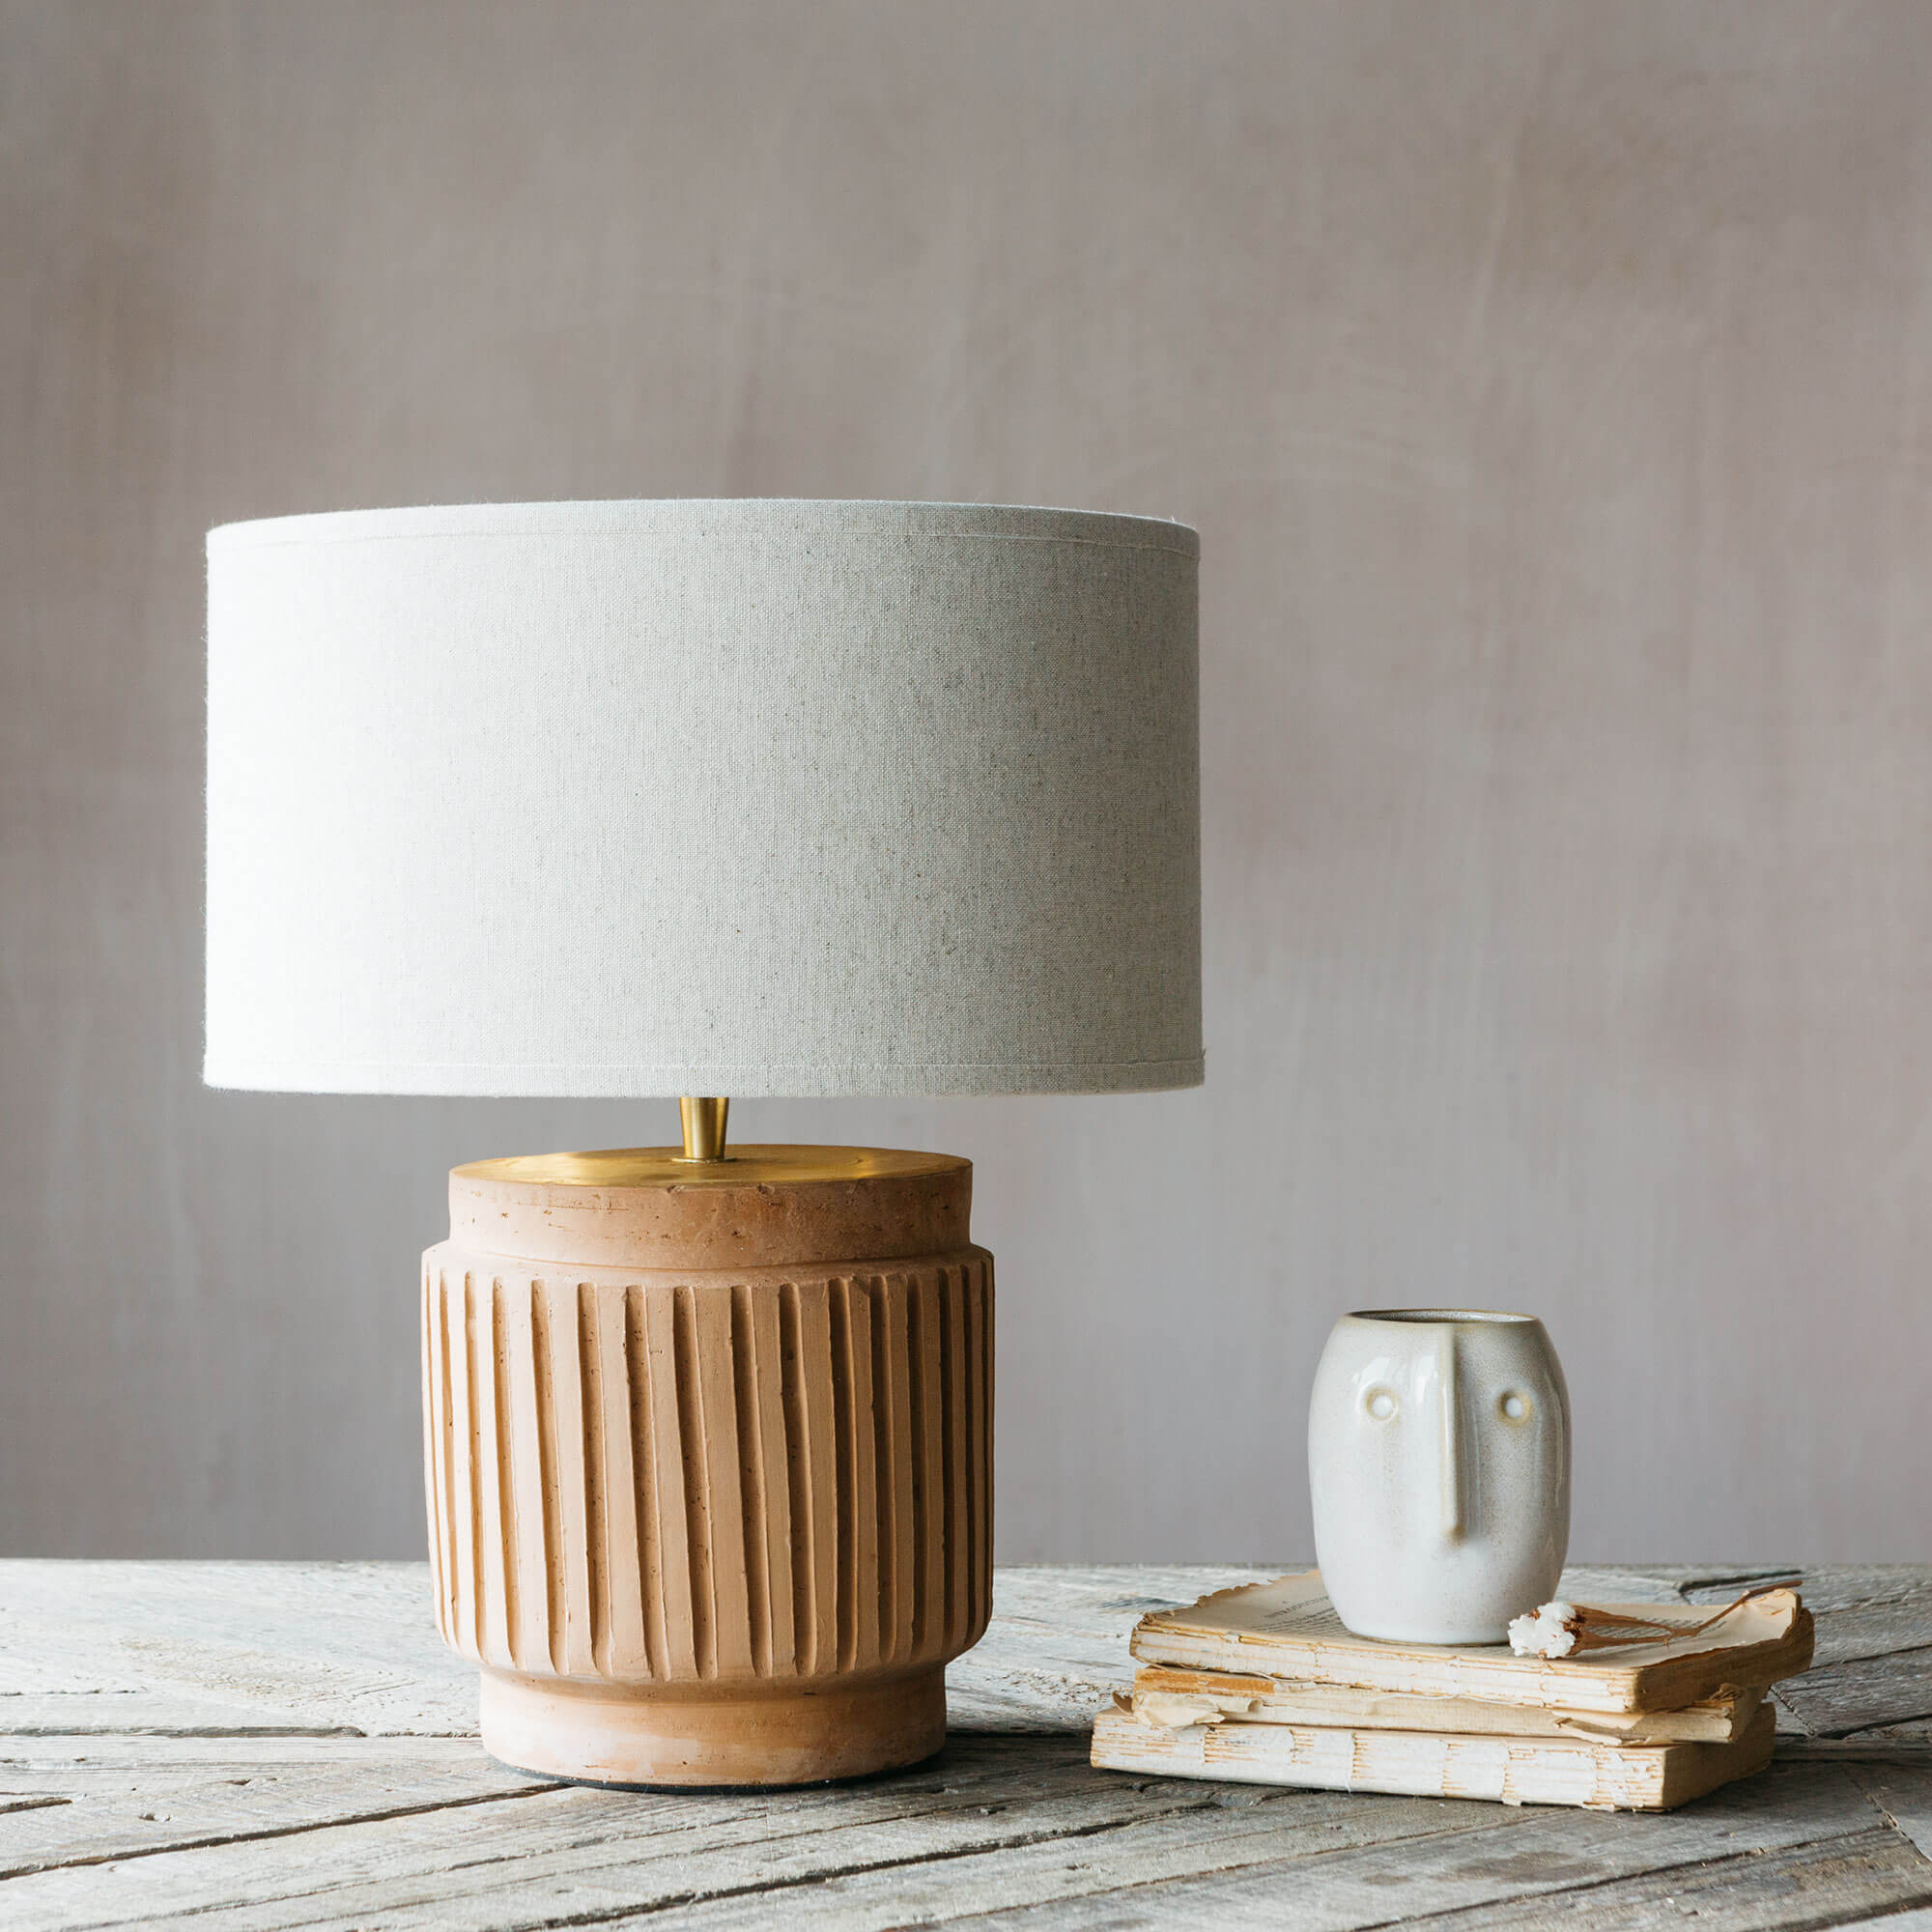 Photo of Graham and green frederique wide table lamp